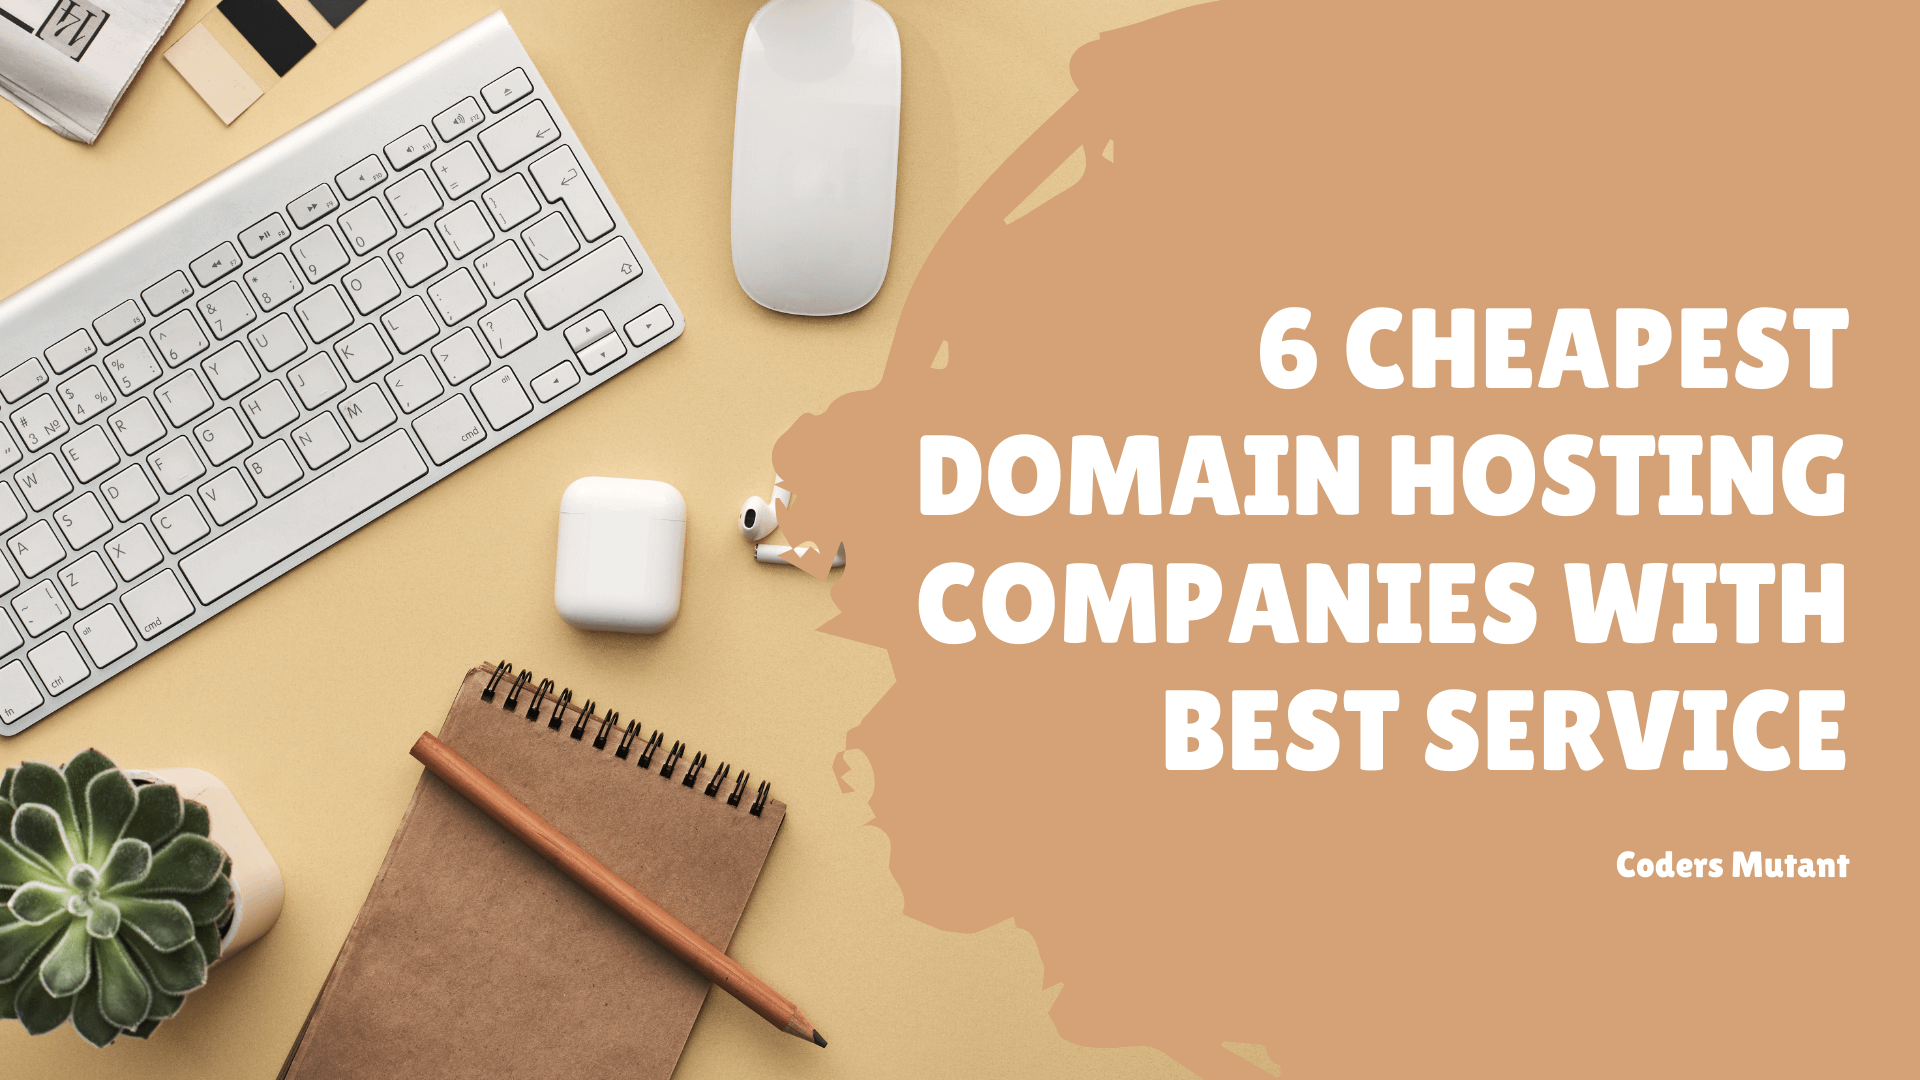 6 cheapest domain hosting companies with best service